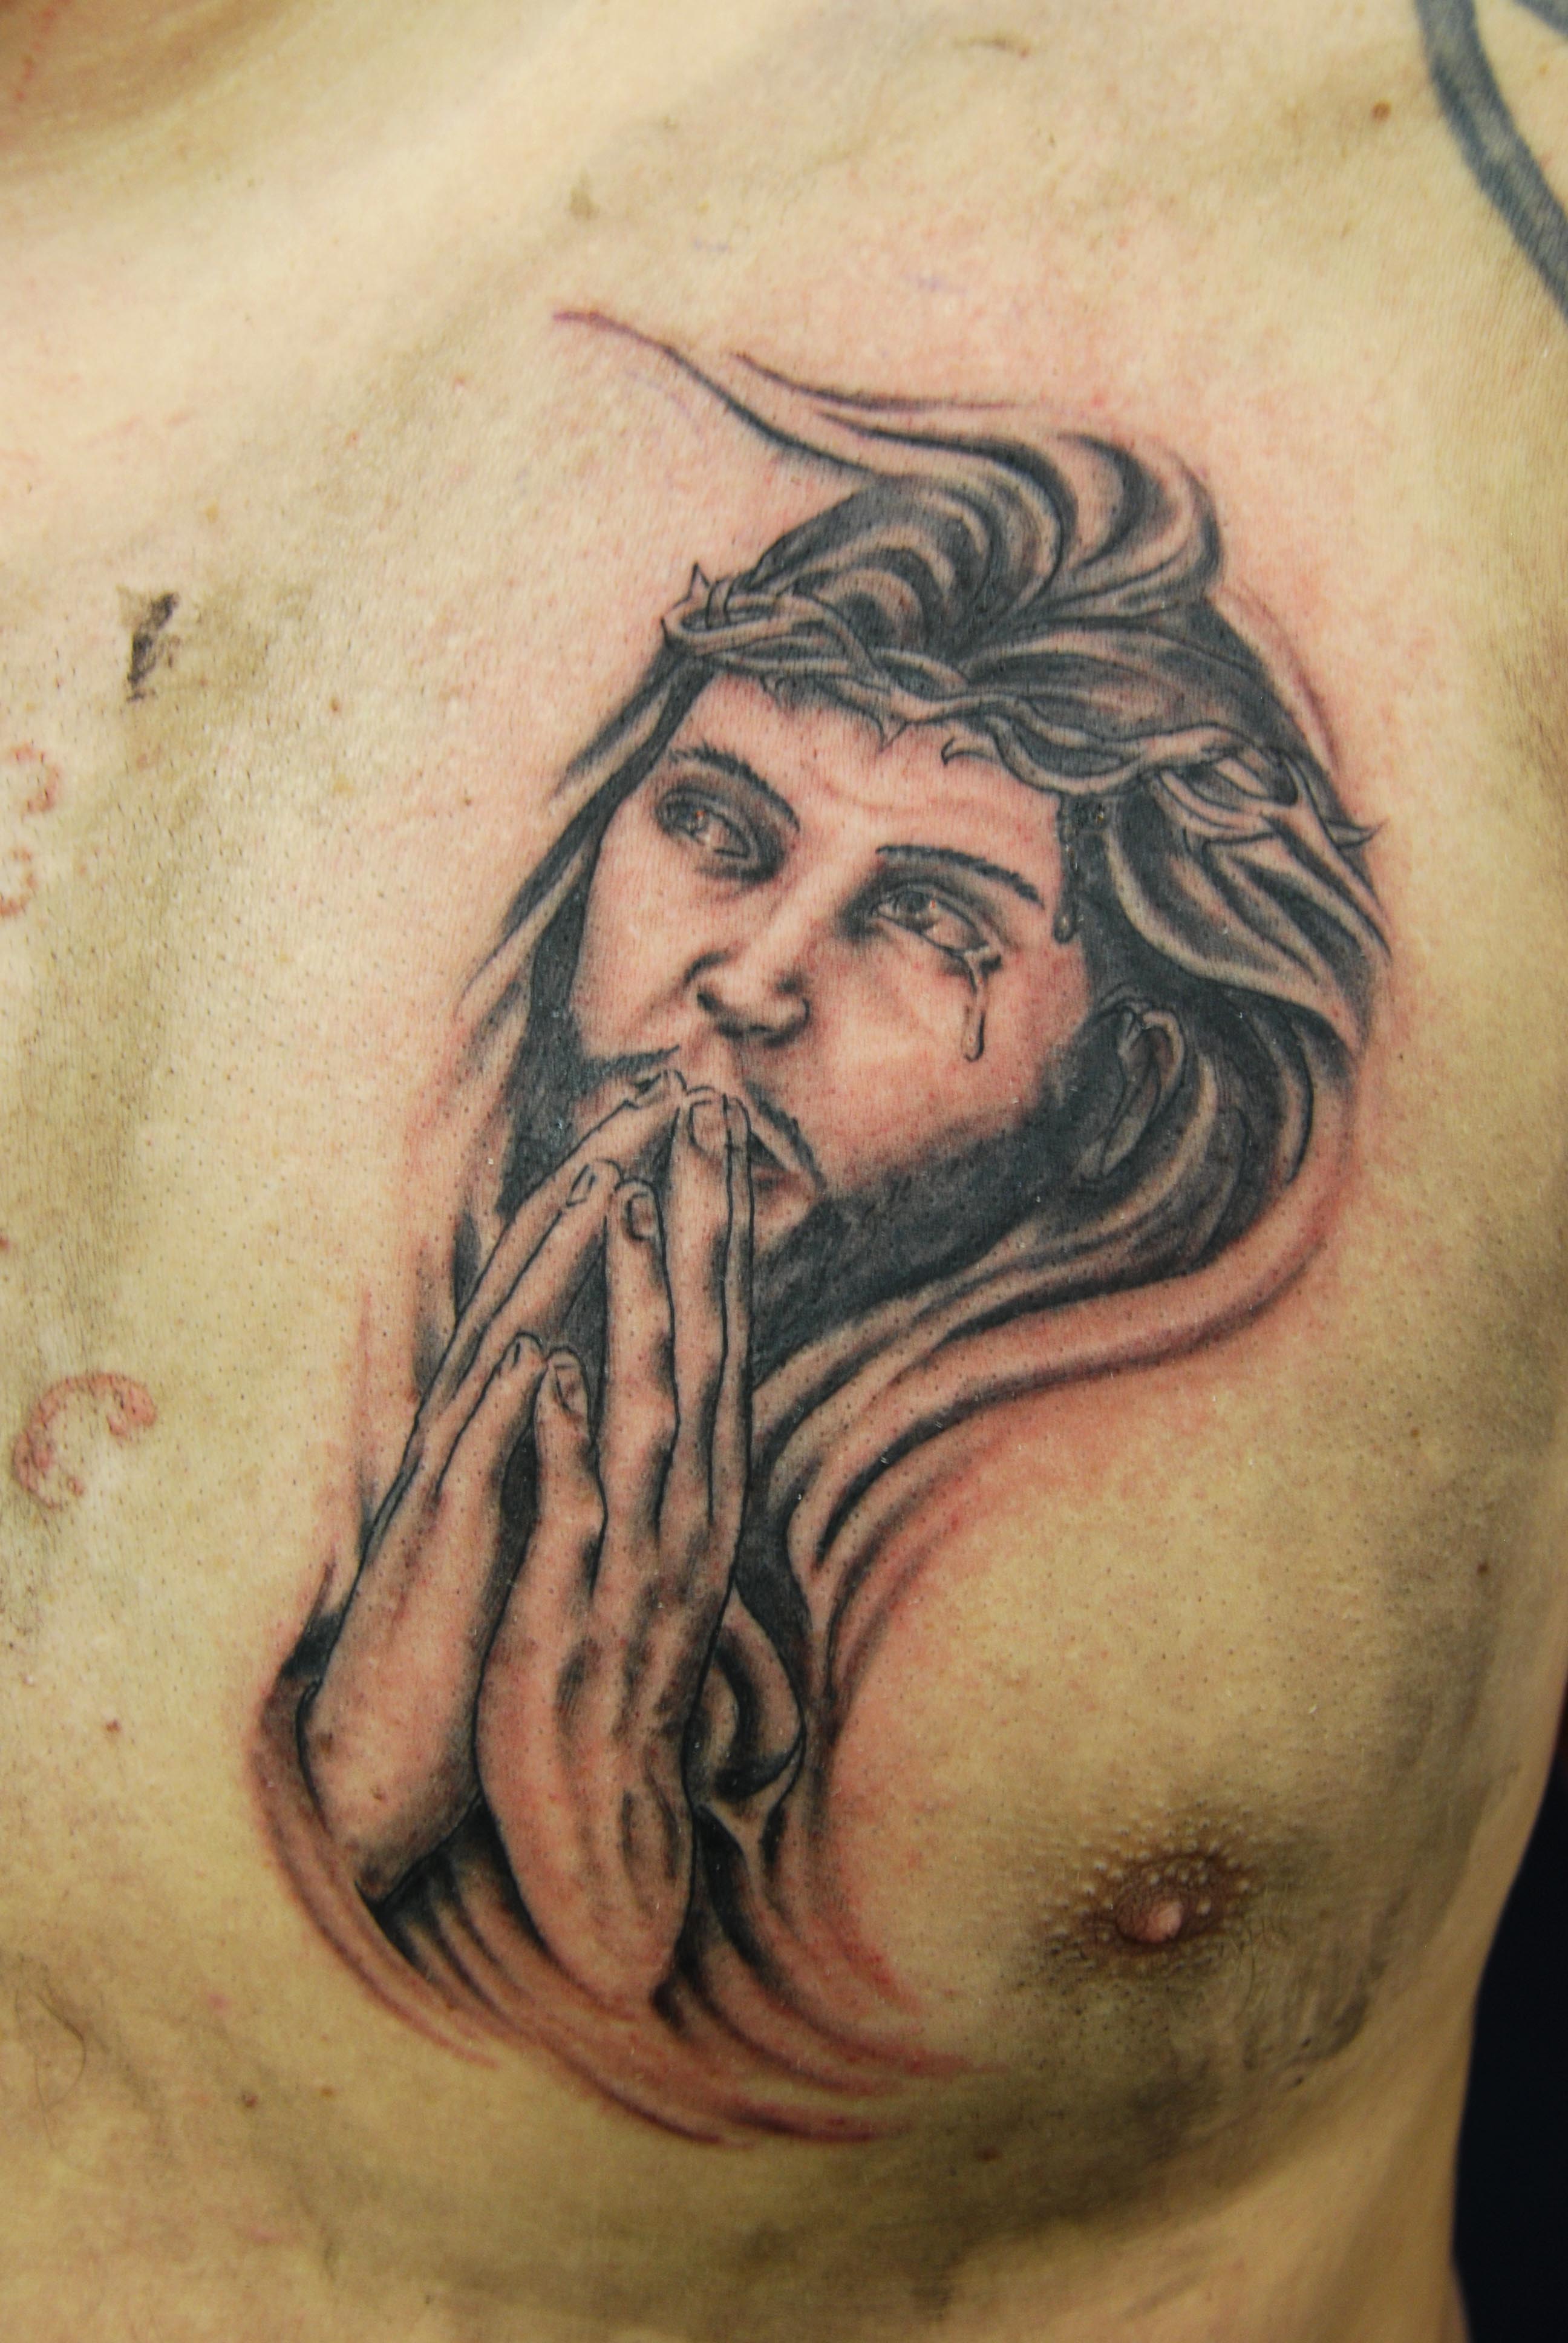 Religious Tattoos Designs Ideas And Meaning Tattoos For You